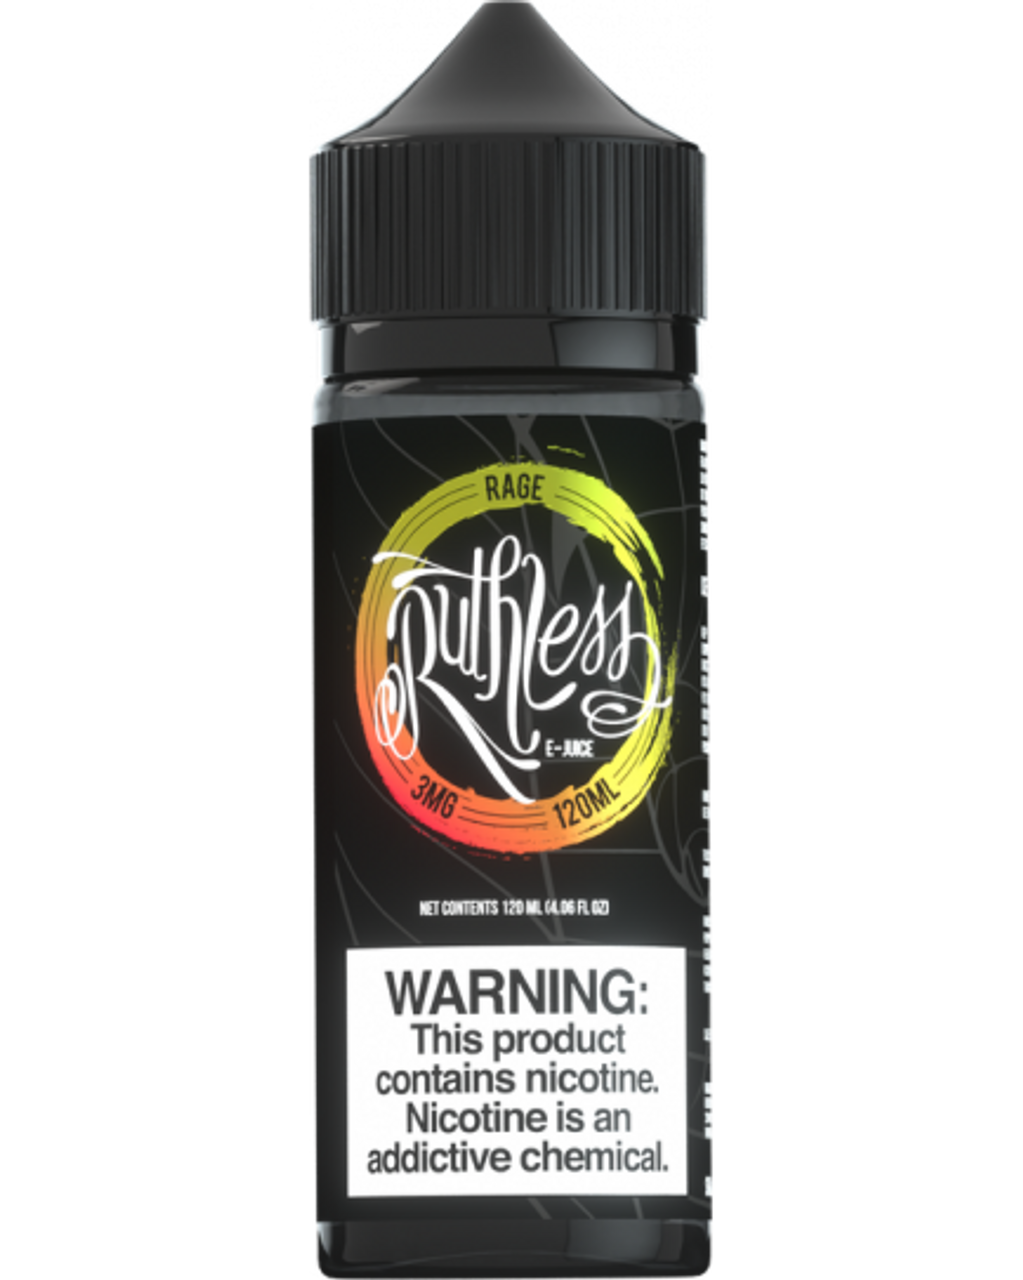 Rage by Ruthless E-Juice